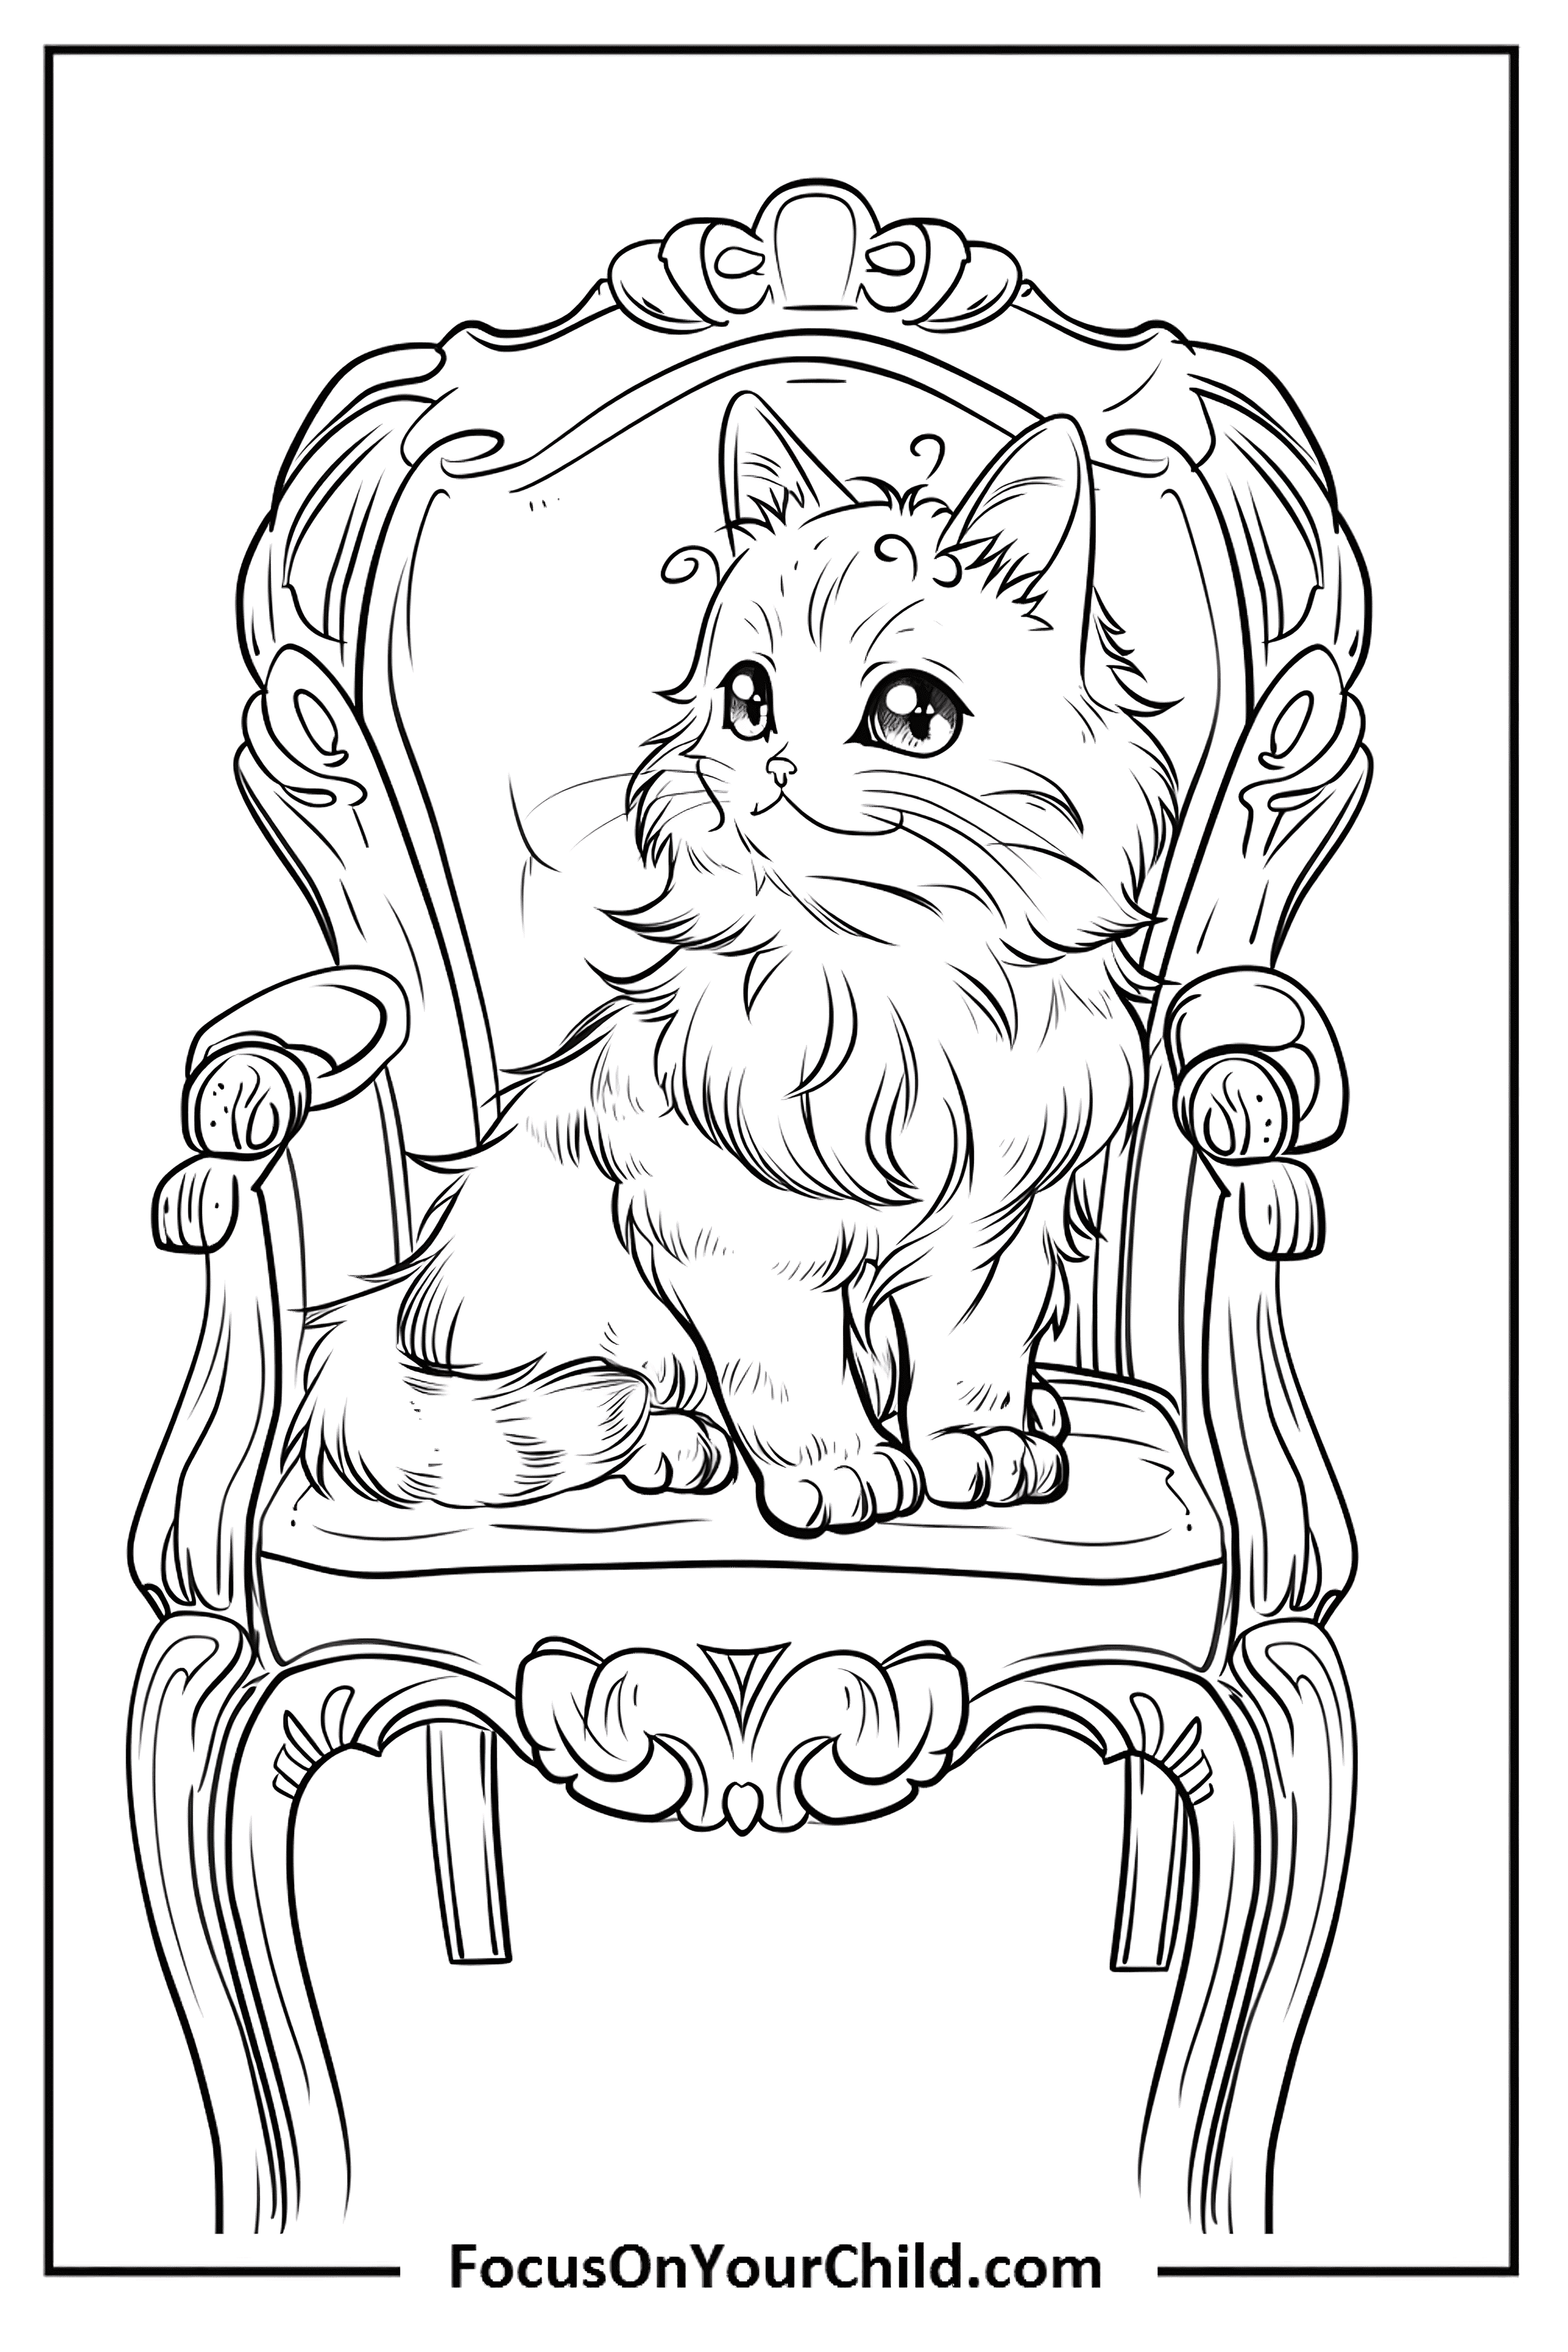 Fluffy kitten on elegant armchair, perfect for coloring activities and cat lovers.